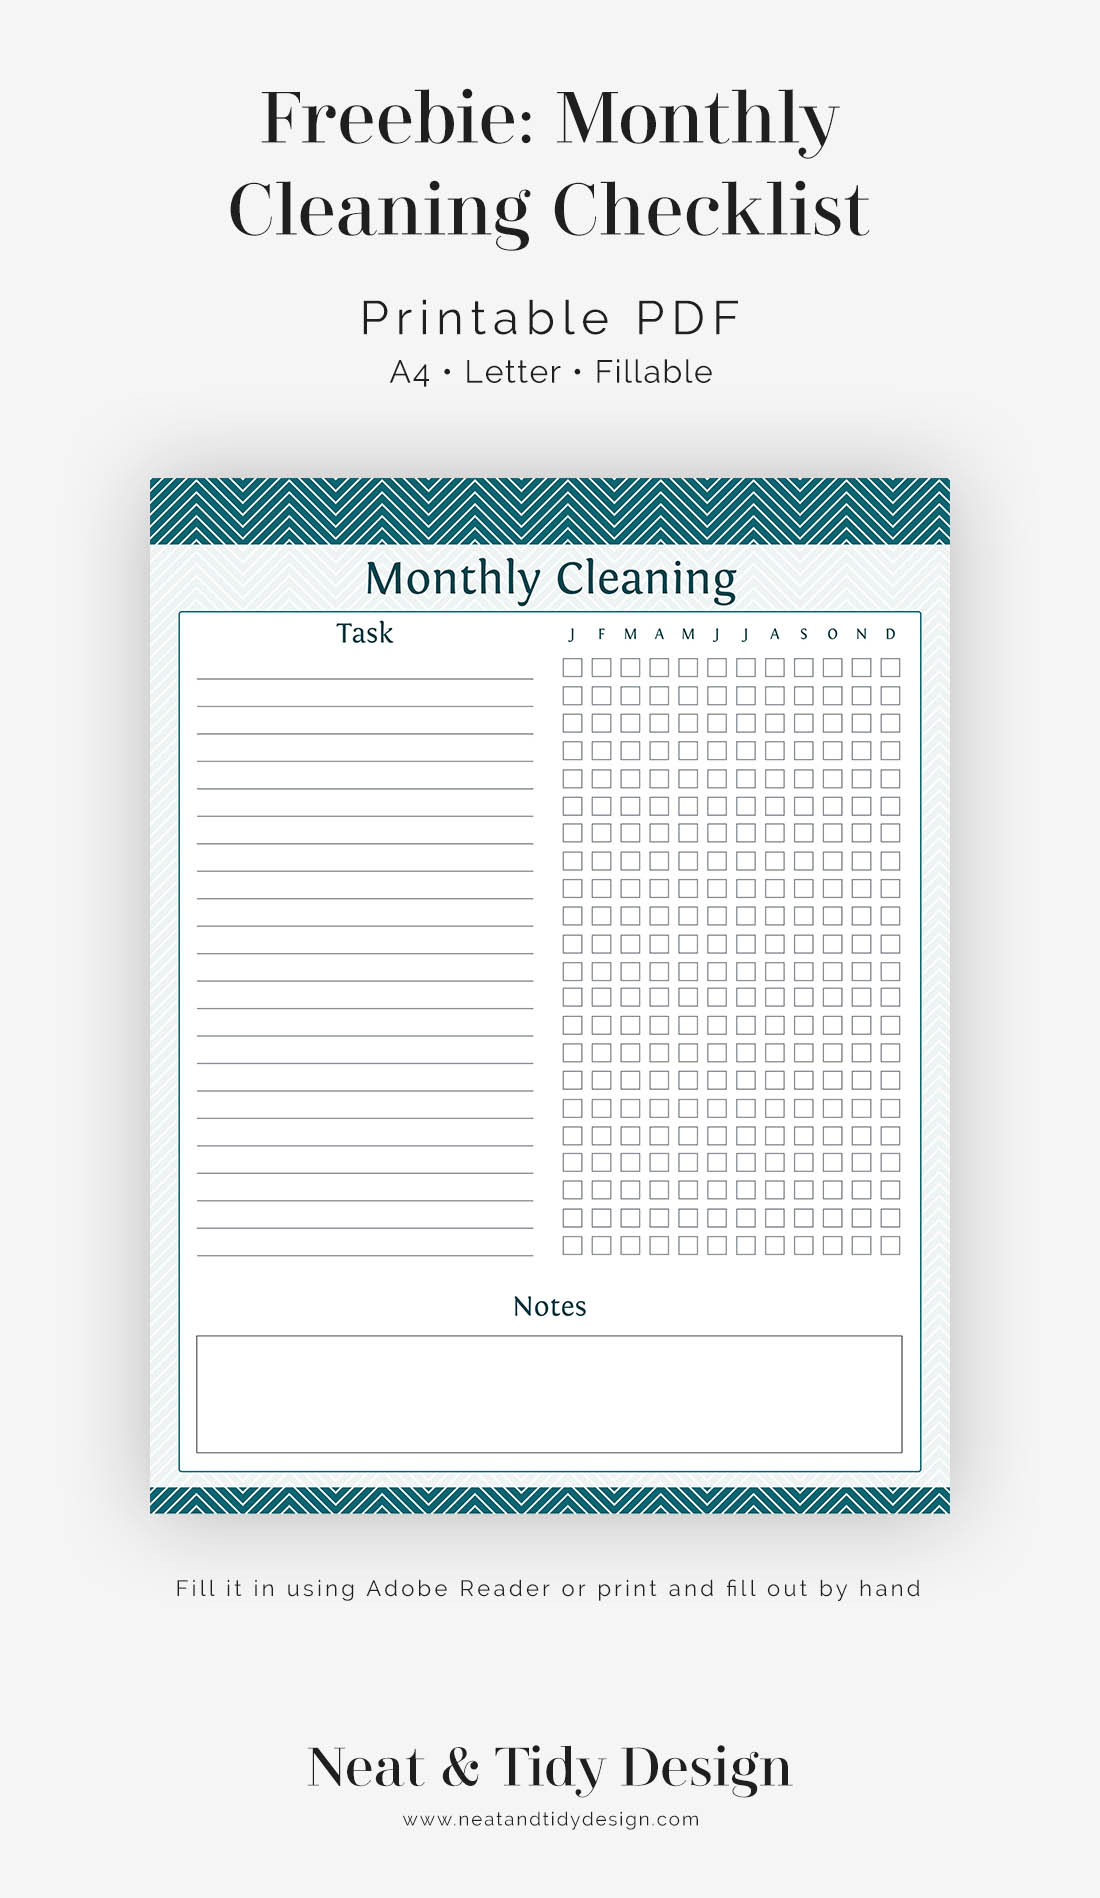 Free printable: Monthly Cleaning Checklist - Neat and Tidy Design With Blank Cleaning Schedule Template